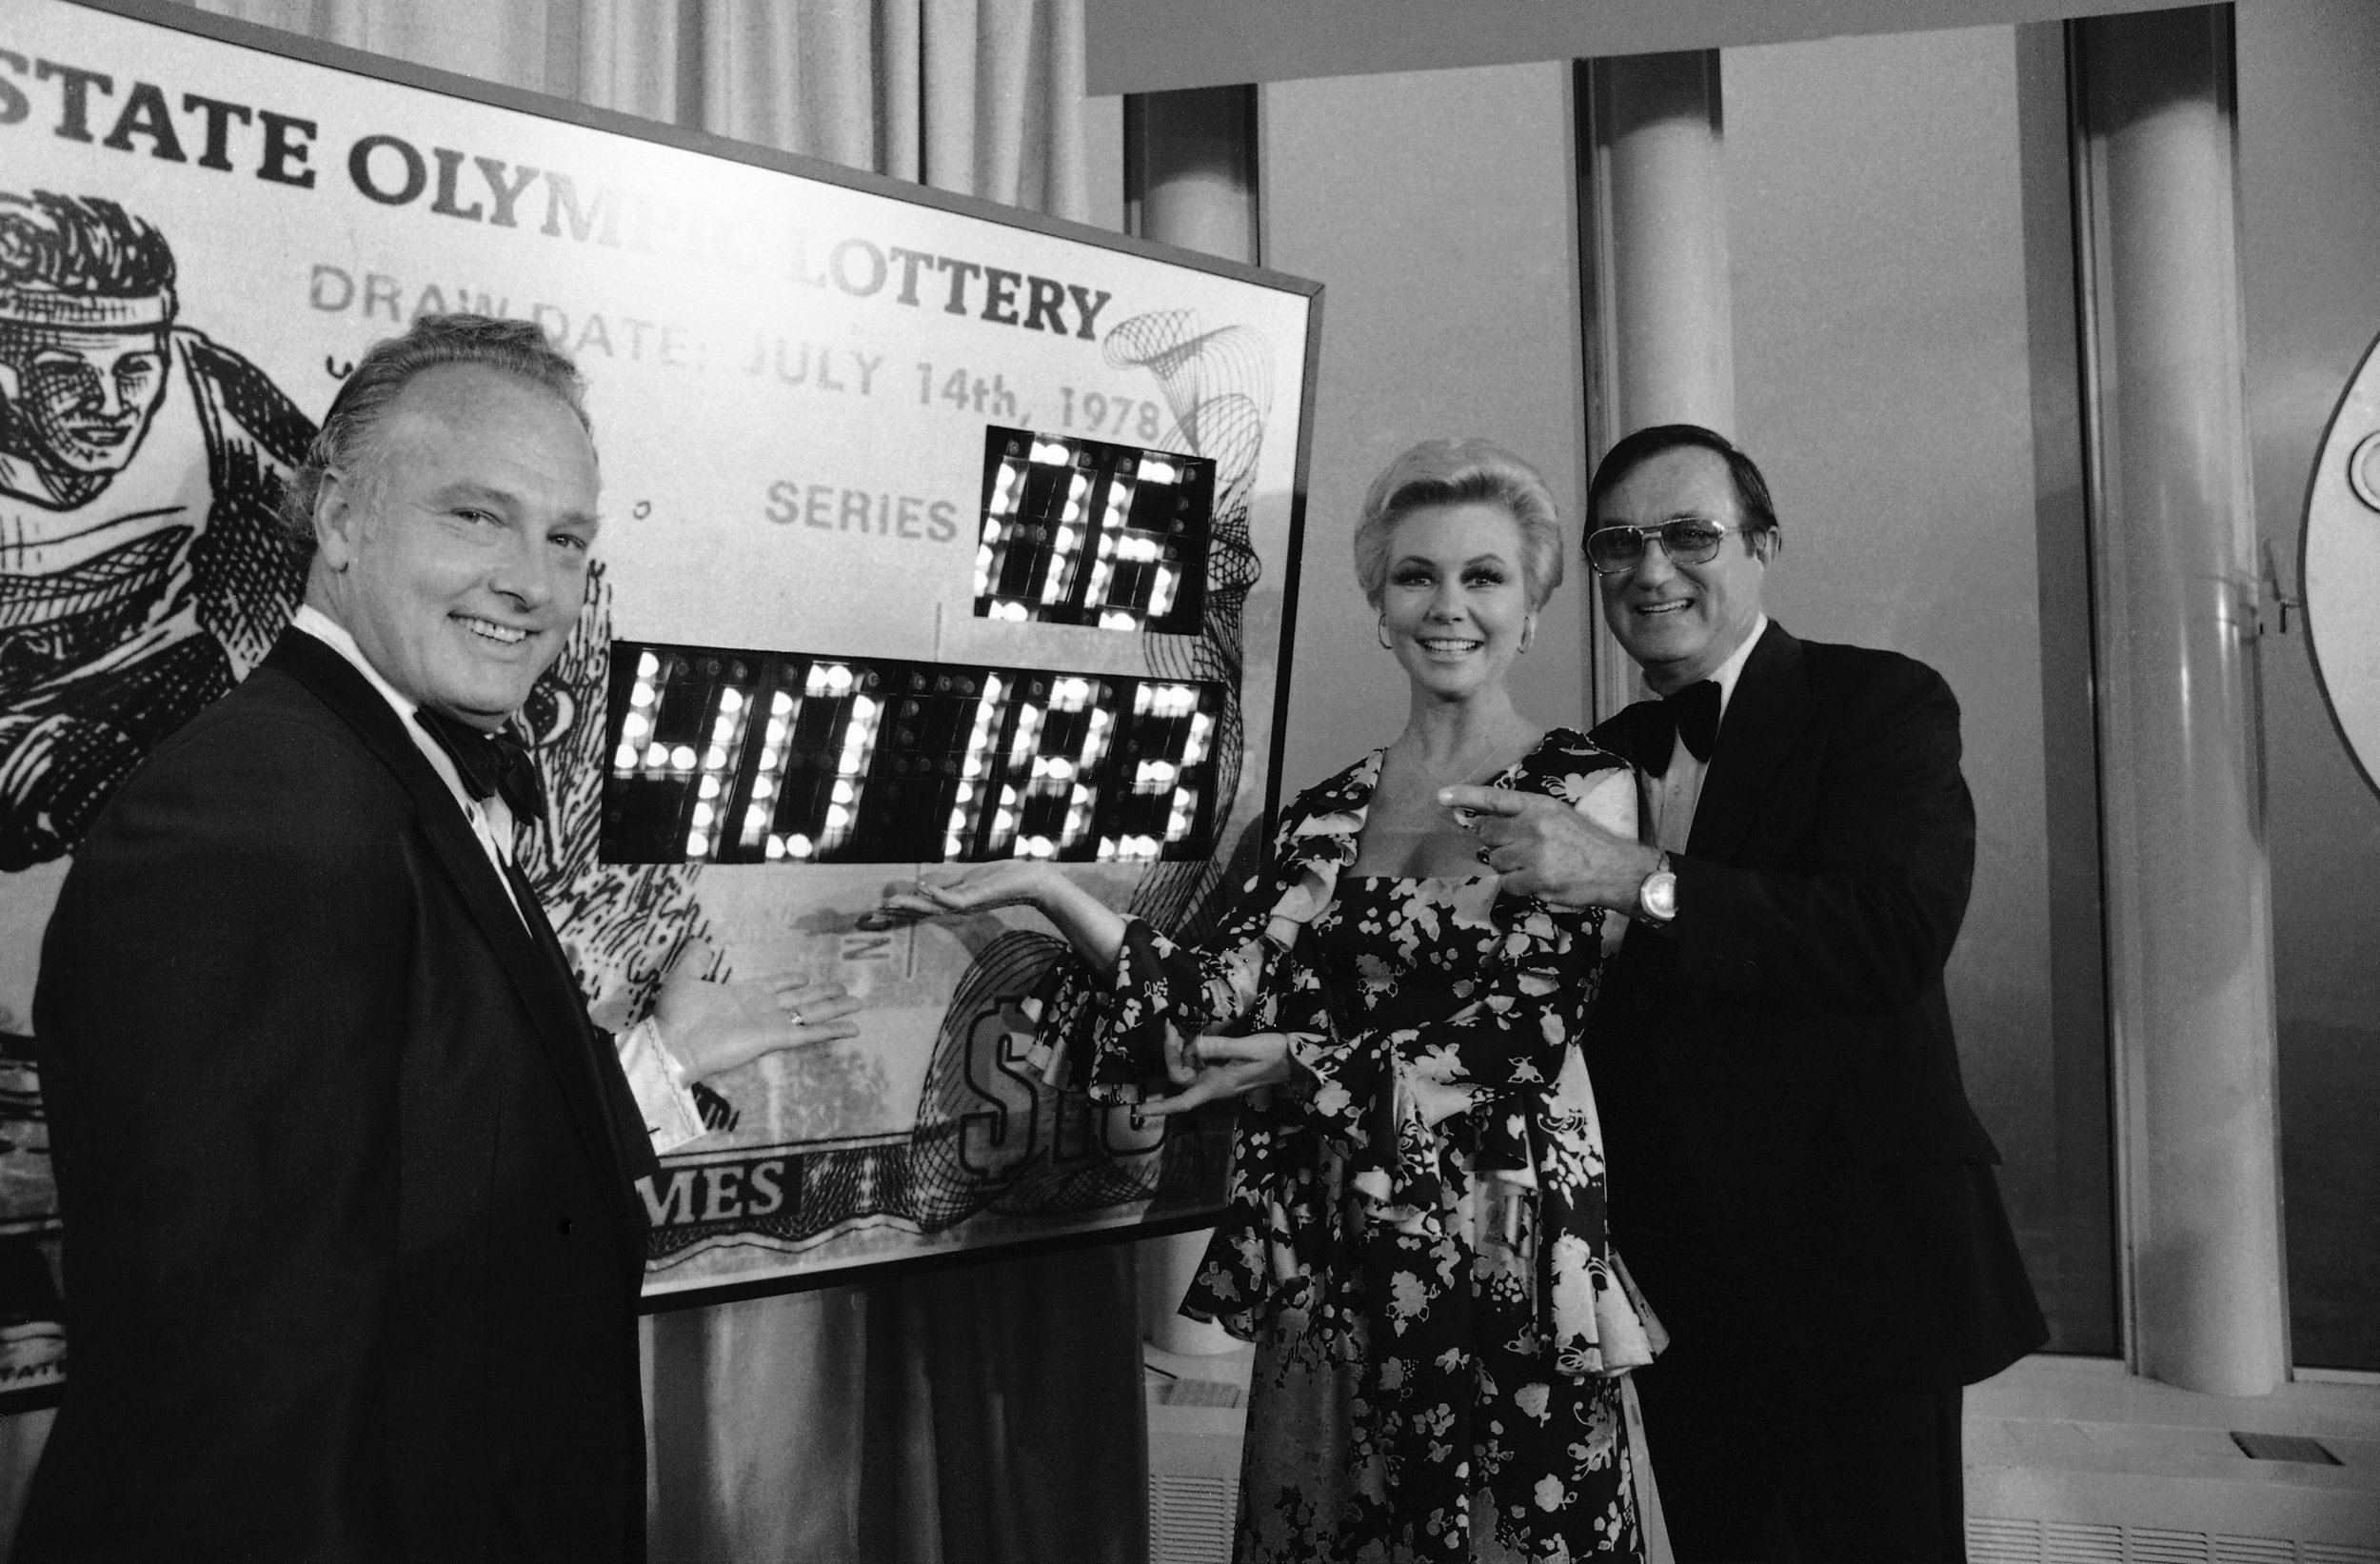  Football star Paul Hornung, left, along with actress Mitzi Gaynor and radio personality Ted Brown point to the $2 million number in the New York state Olympic lottery on Friday, July 14, 1978 at the World Trade Center in New York.     Other winning 